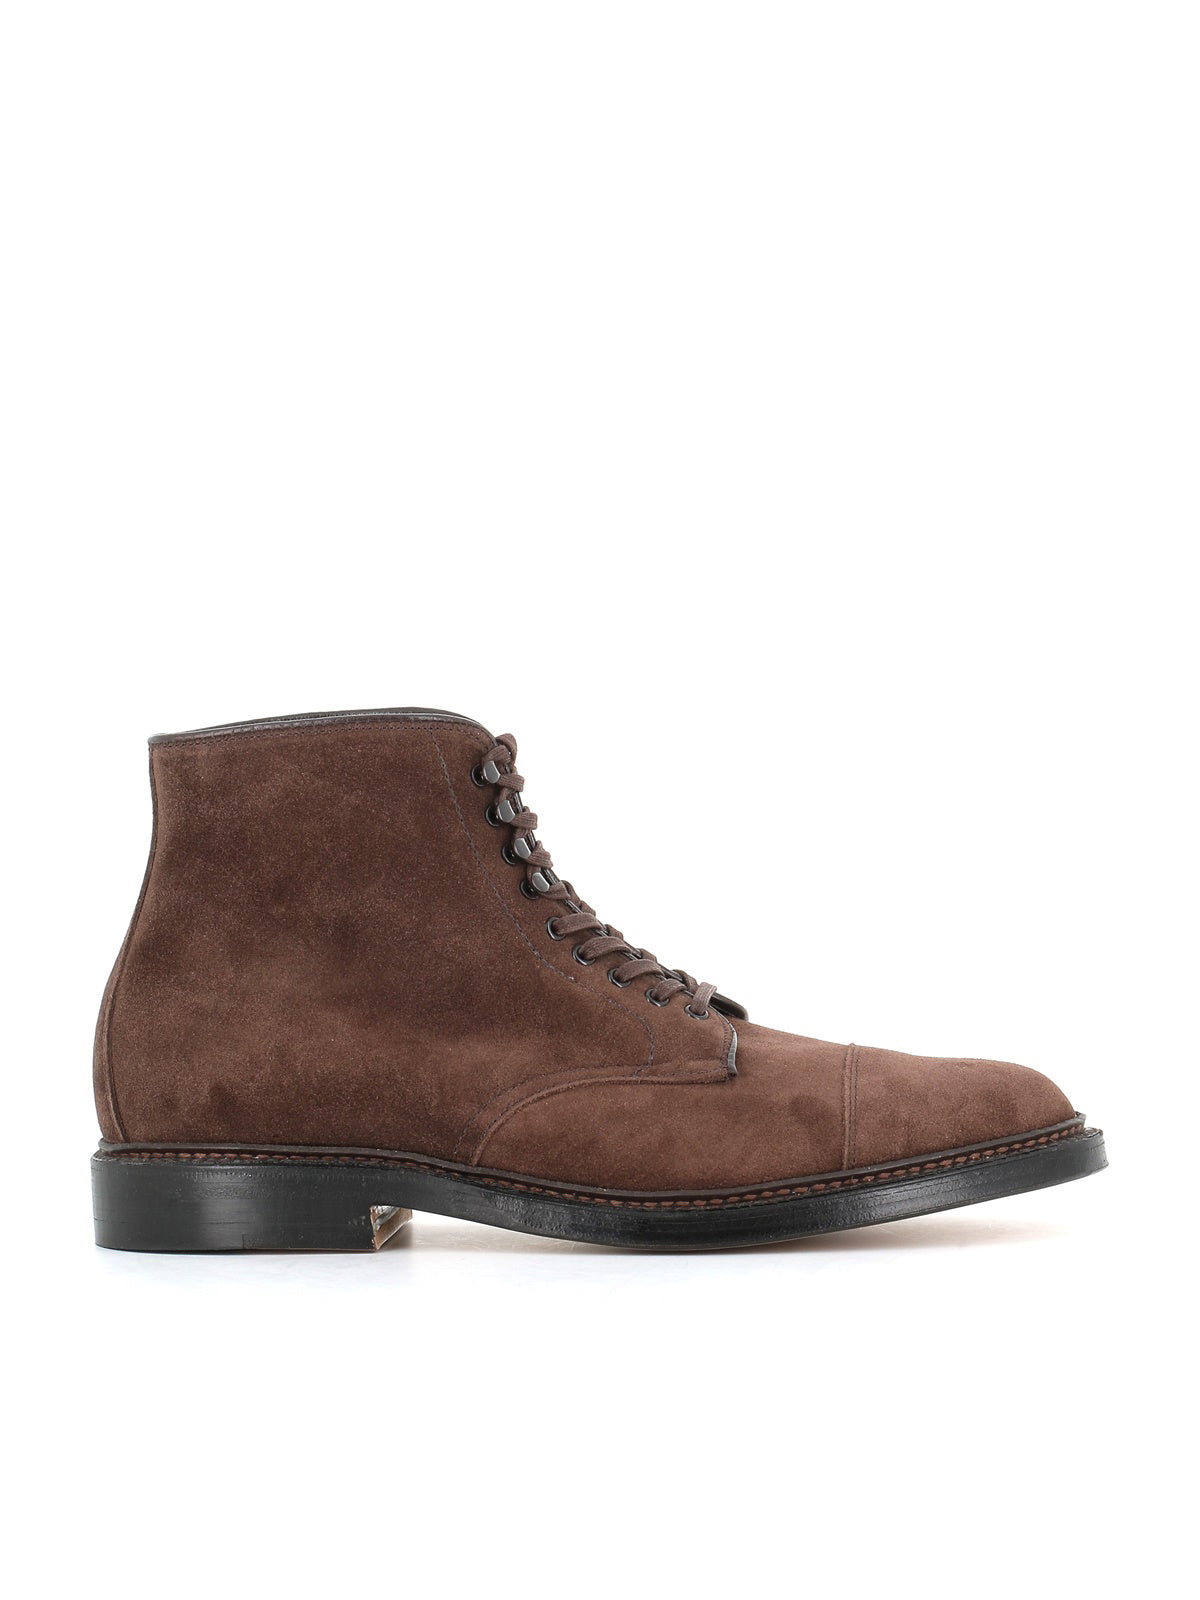  Lace-up Boot 4081 Hy Alden Uomo Marrone - 1